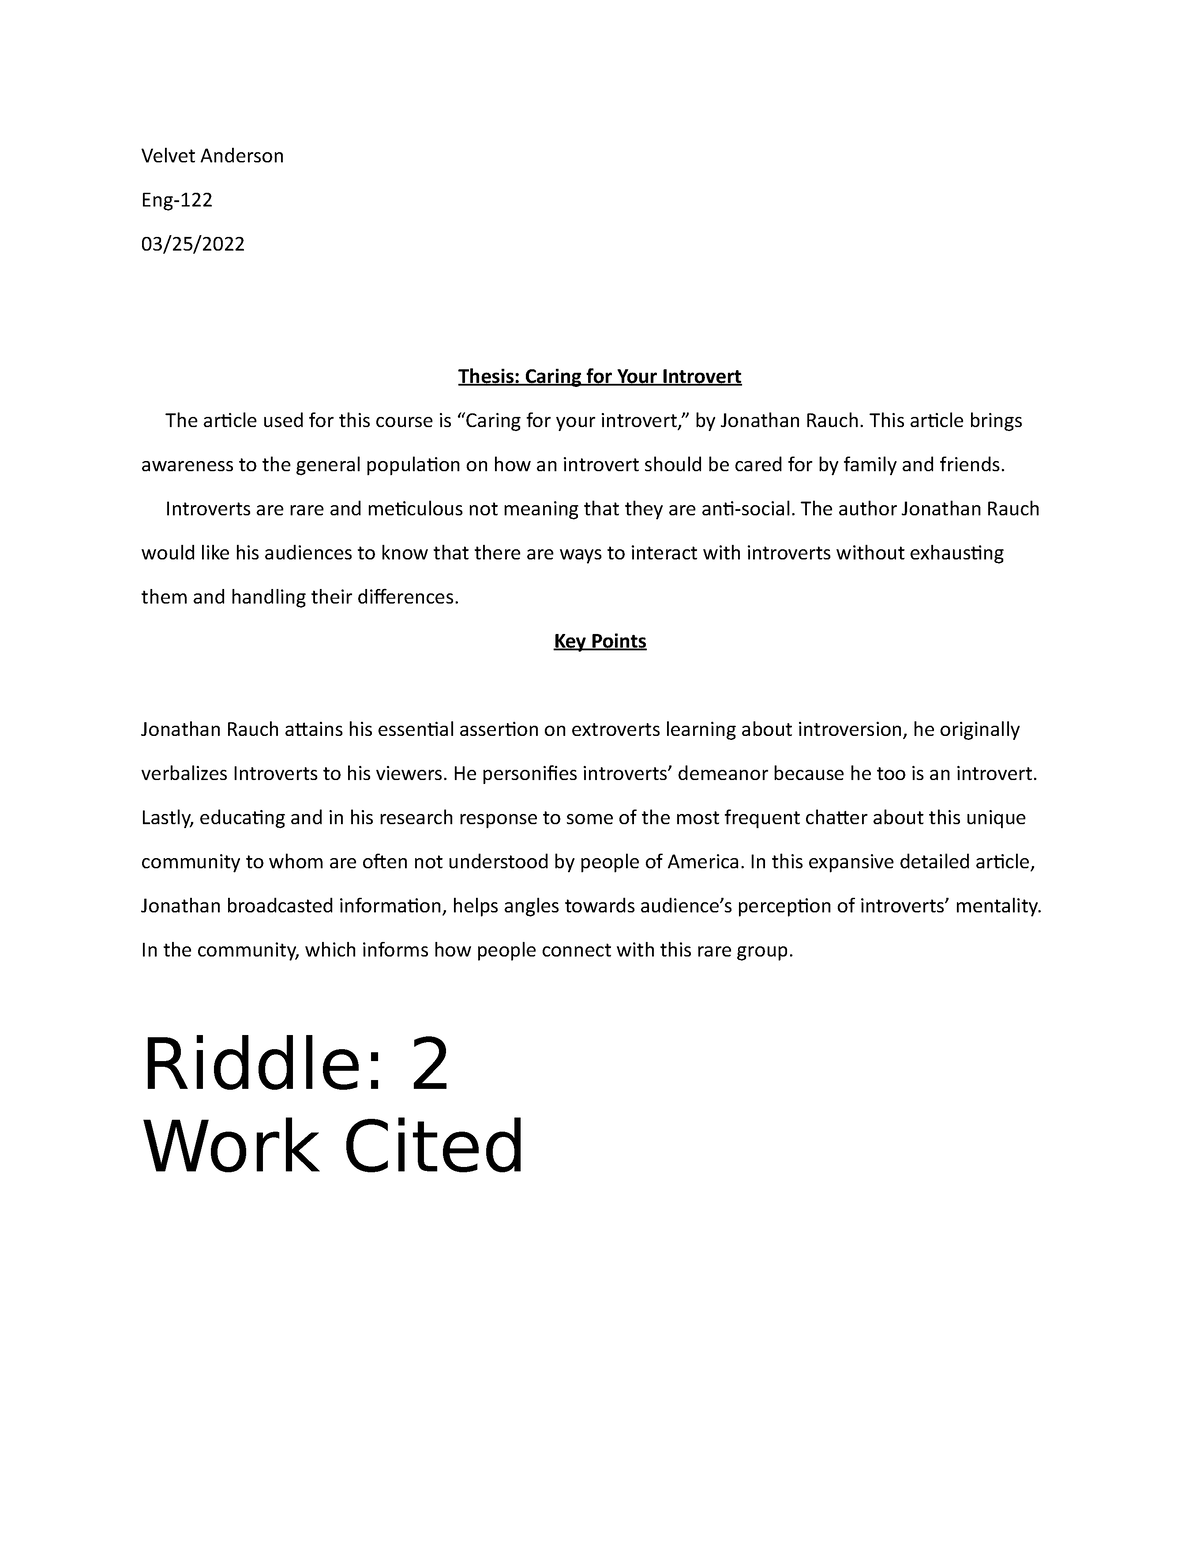 thesis and assignment writing by anderson pdf